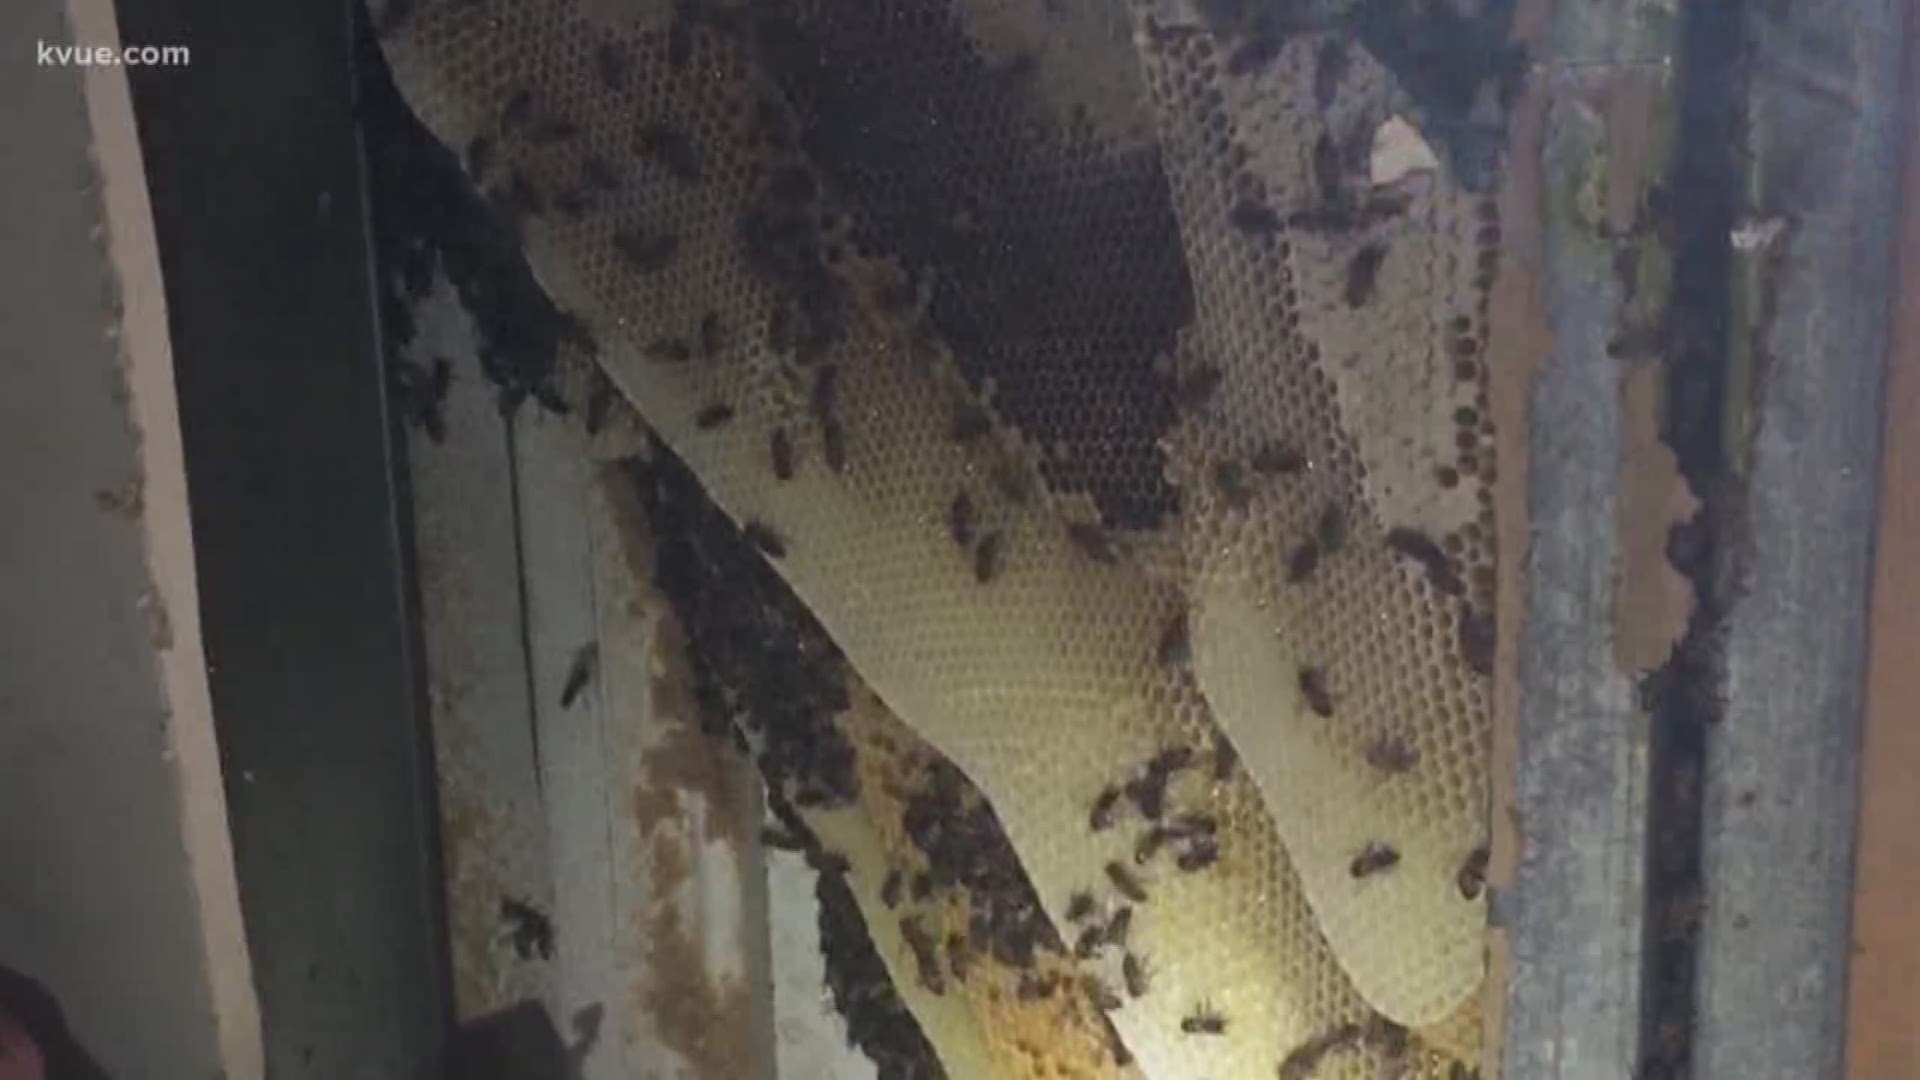 An Austin woman is recovering after a swarm of bees attacked her outside her home.